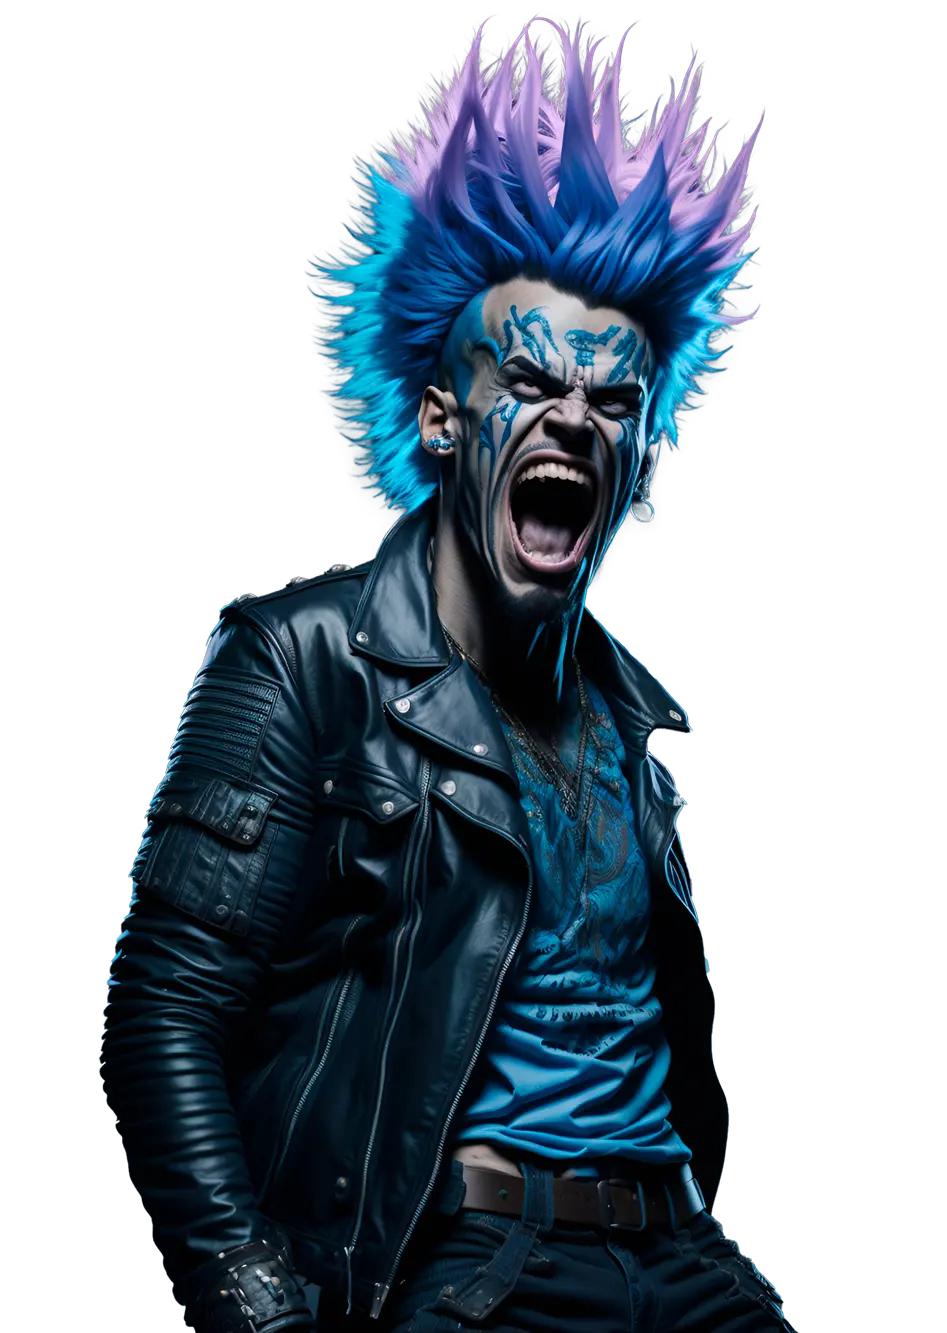 A punk rocker with extreme hair